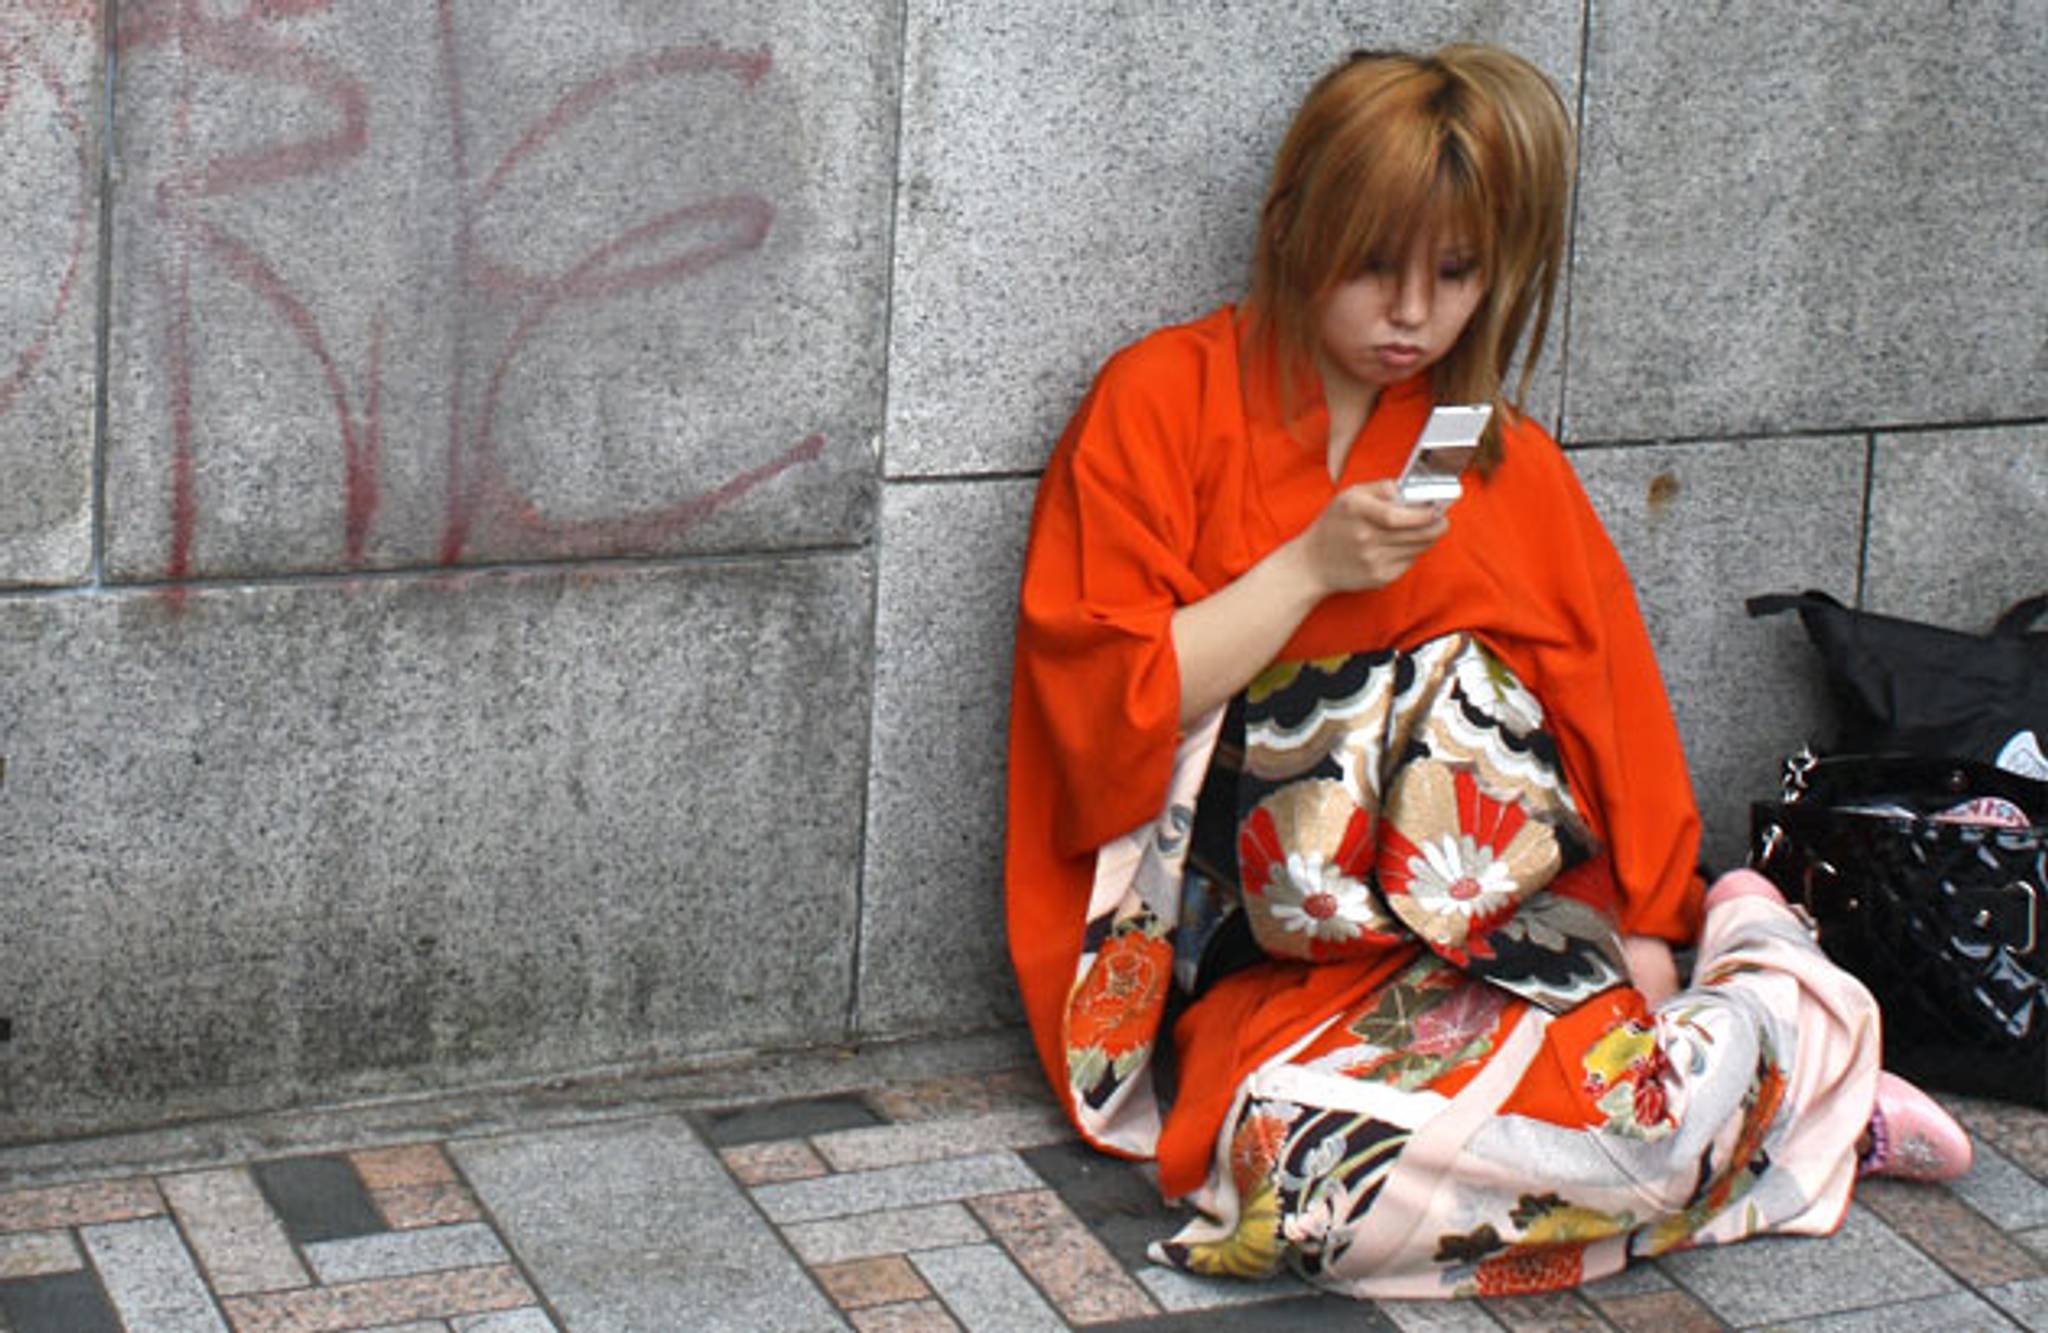 Mobile use in Japan